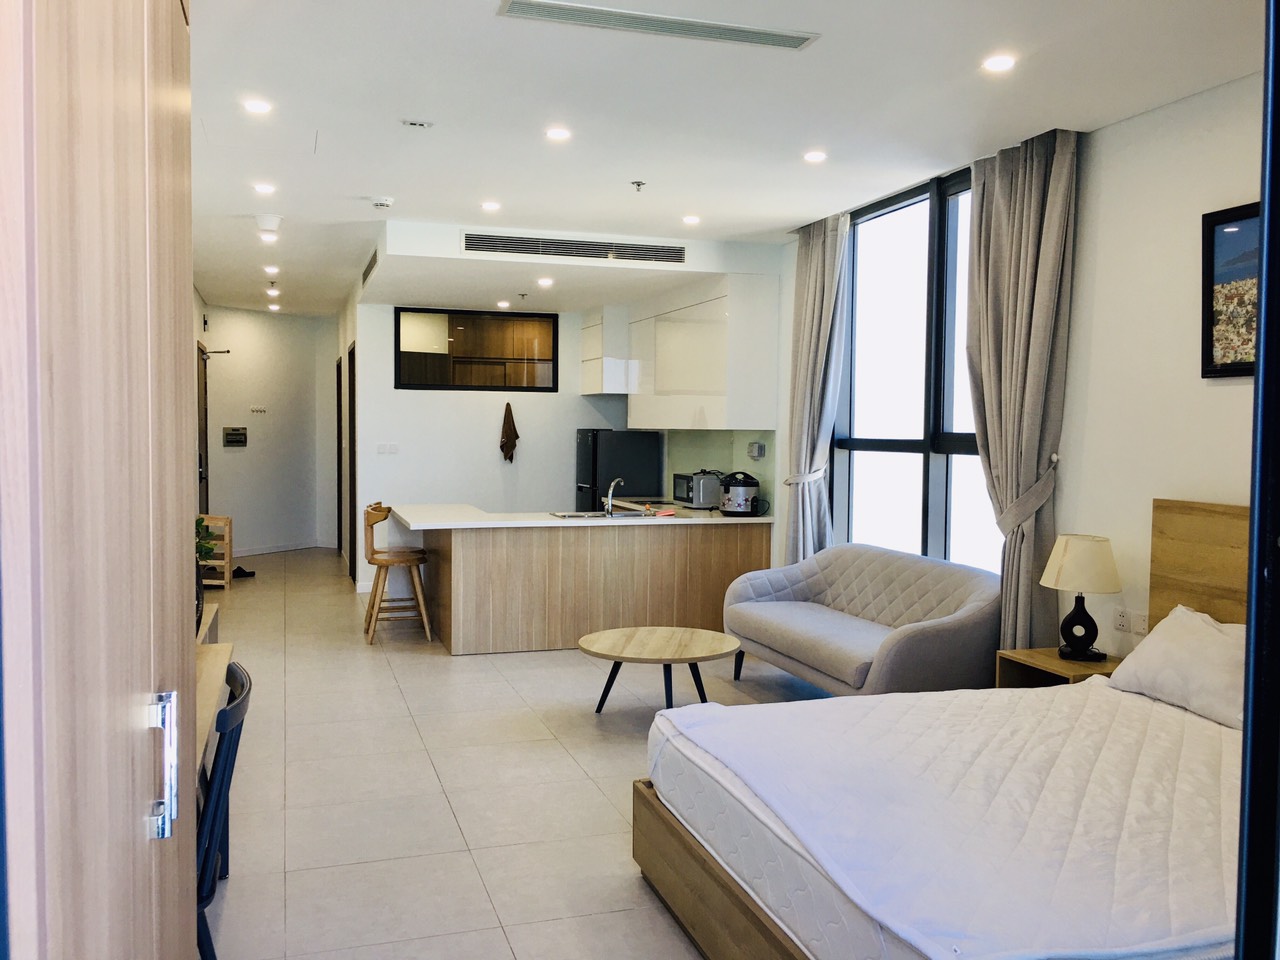 Scenia Bay Nha Trang for rent | One bedroom plus | Sea view towards the Marina and Co Tien mountain | 15 million